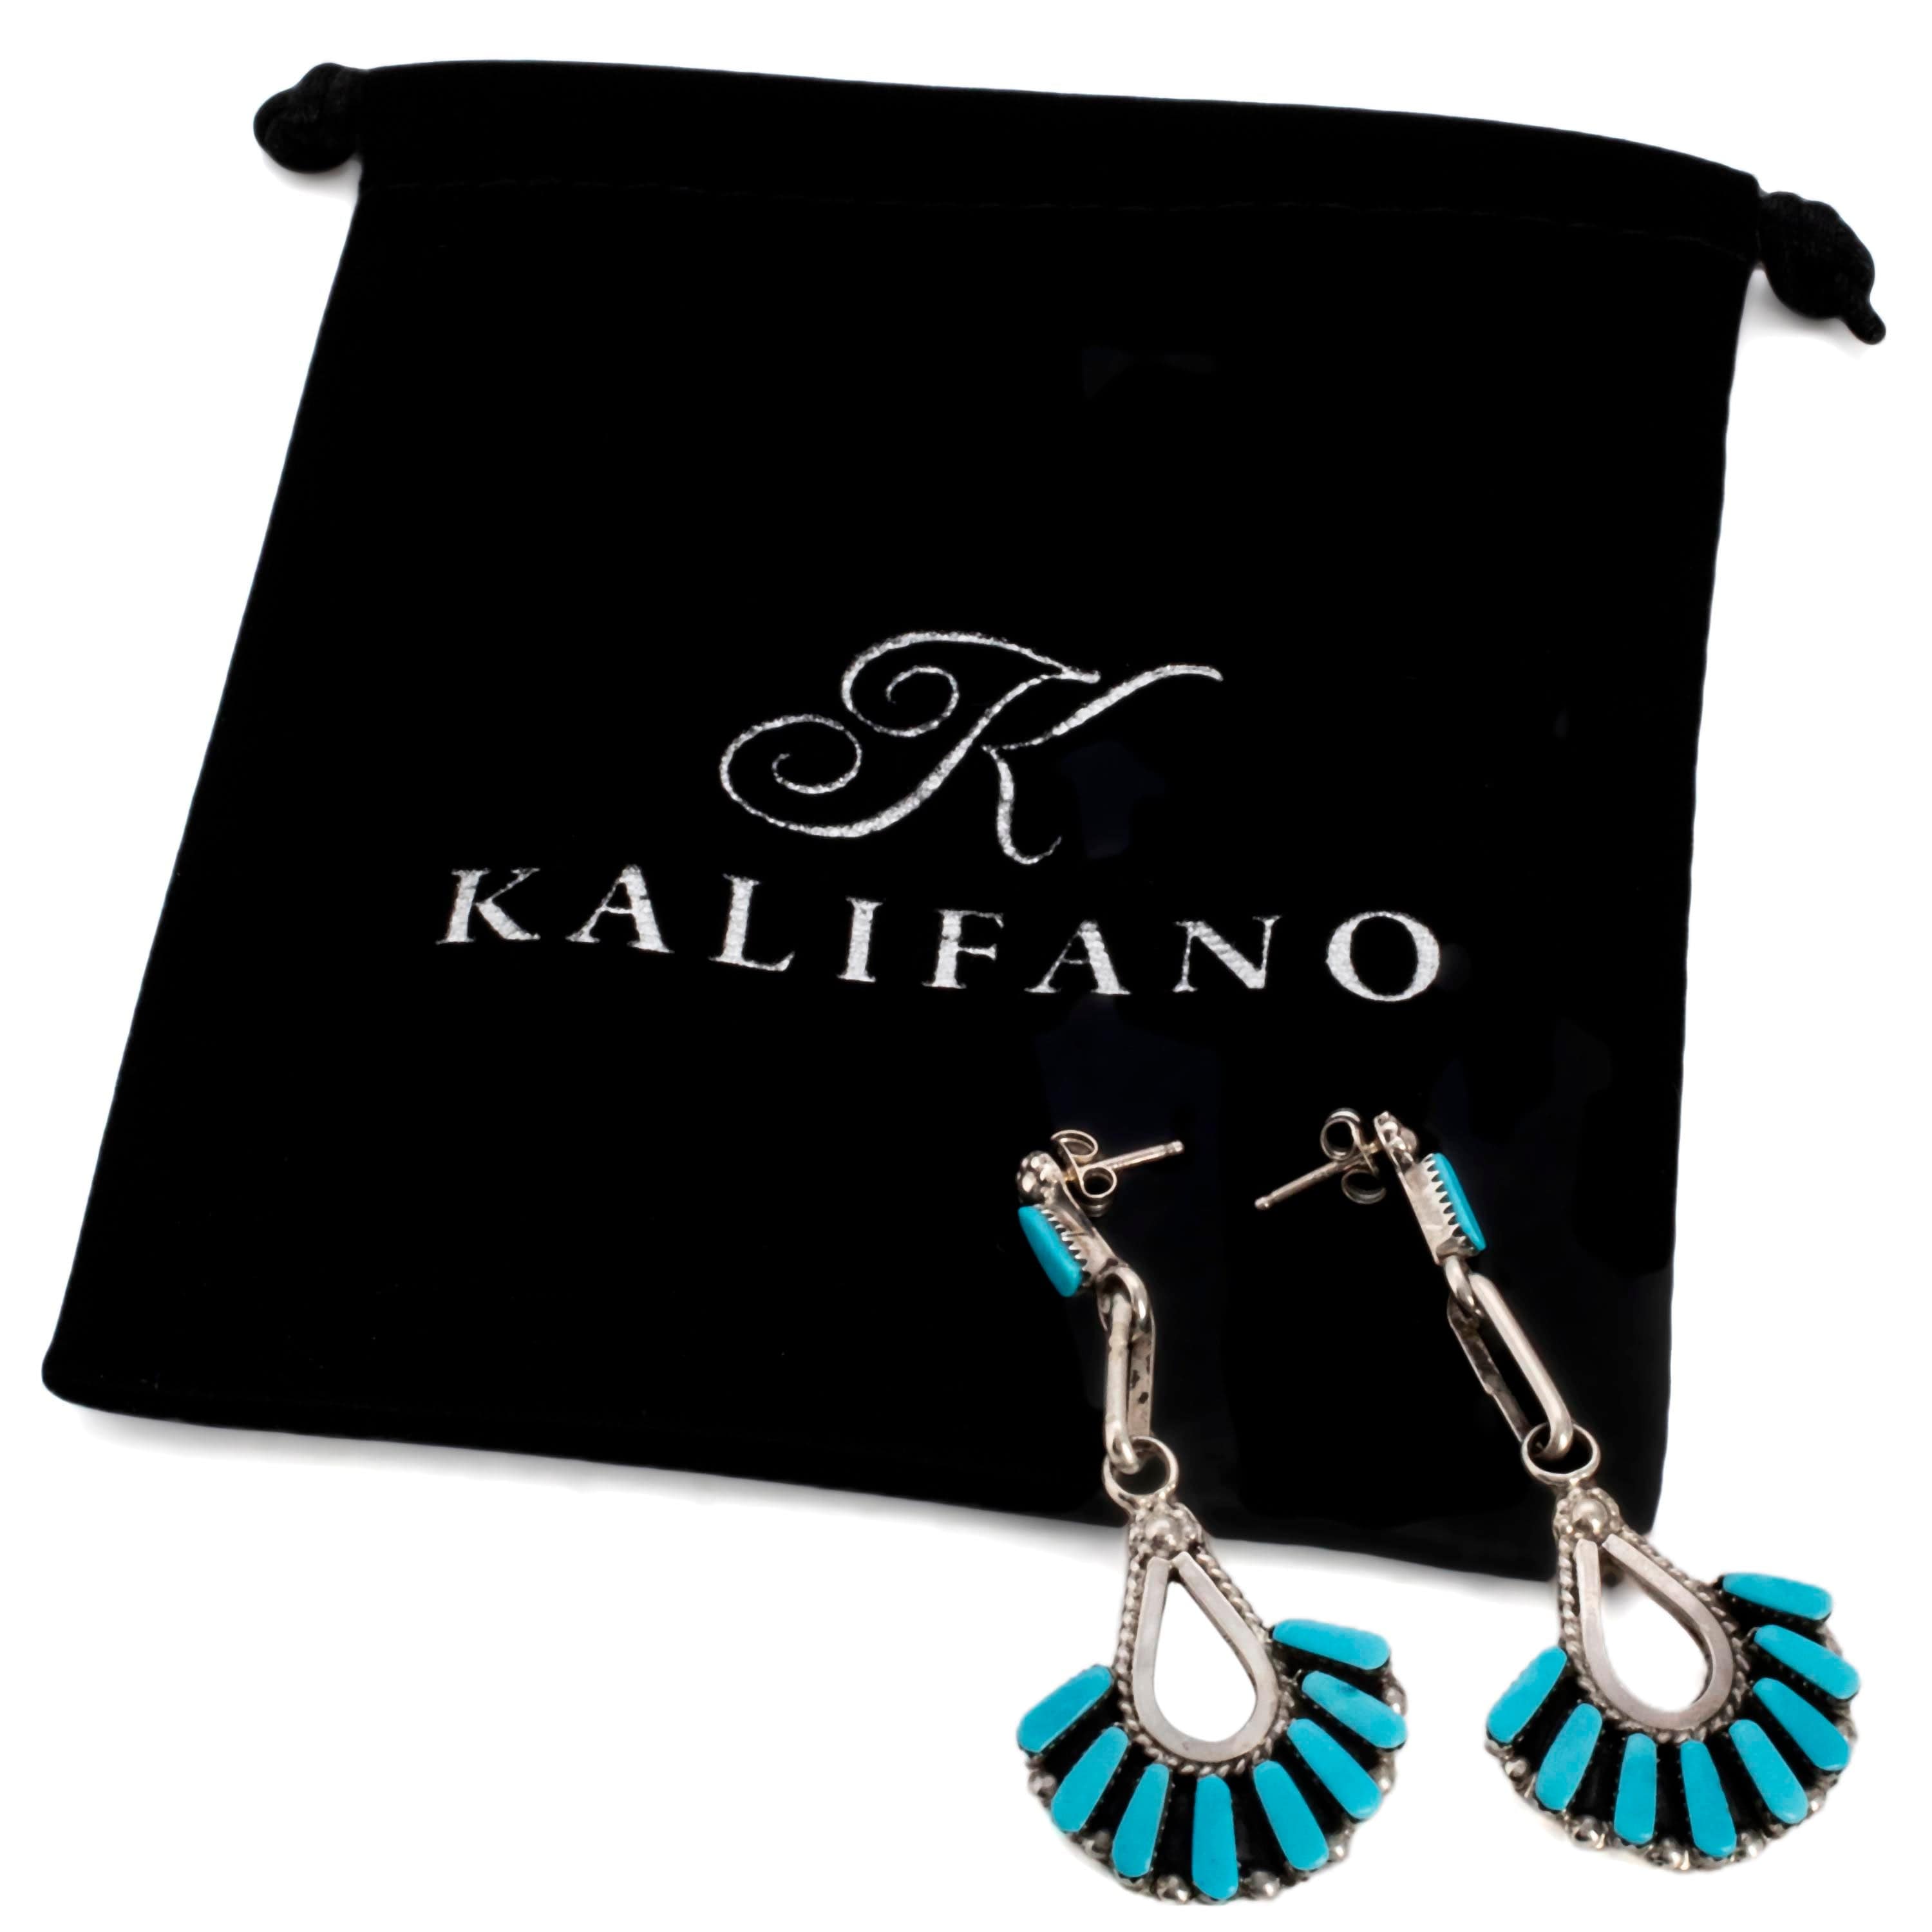 Kalifano Native American Jewelry Kingman Turquoise Zuni Needle Point USA Native American Made Sterling Silver Earrings NAE700.002